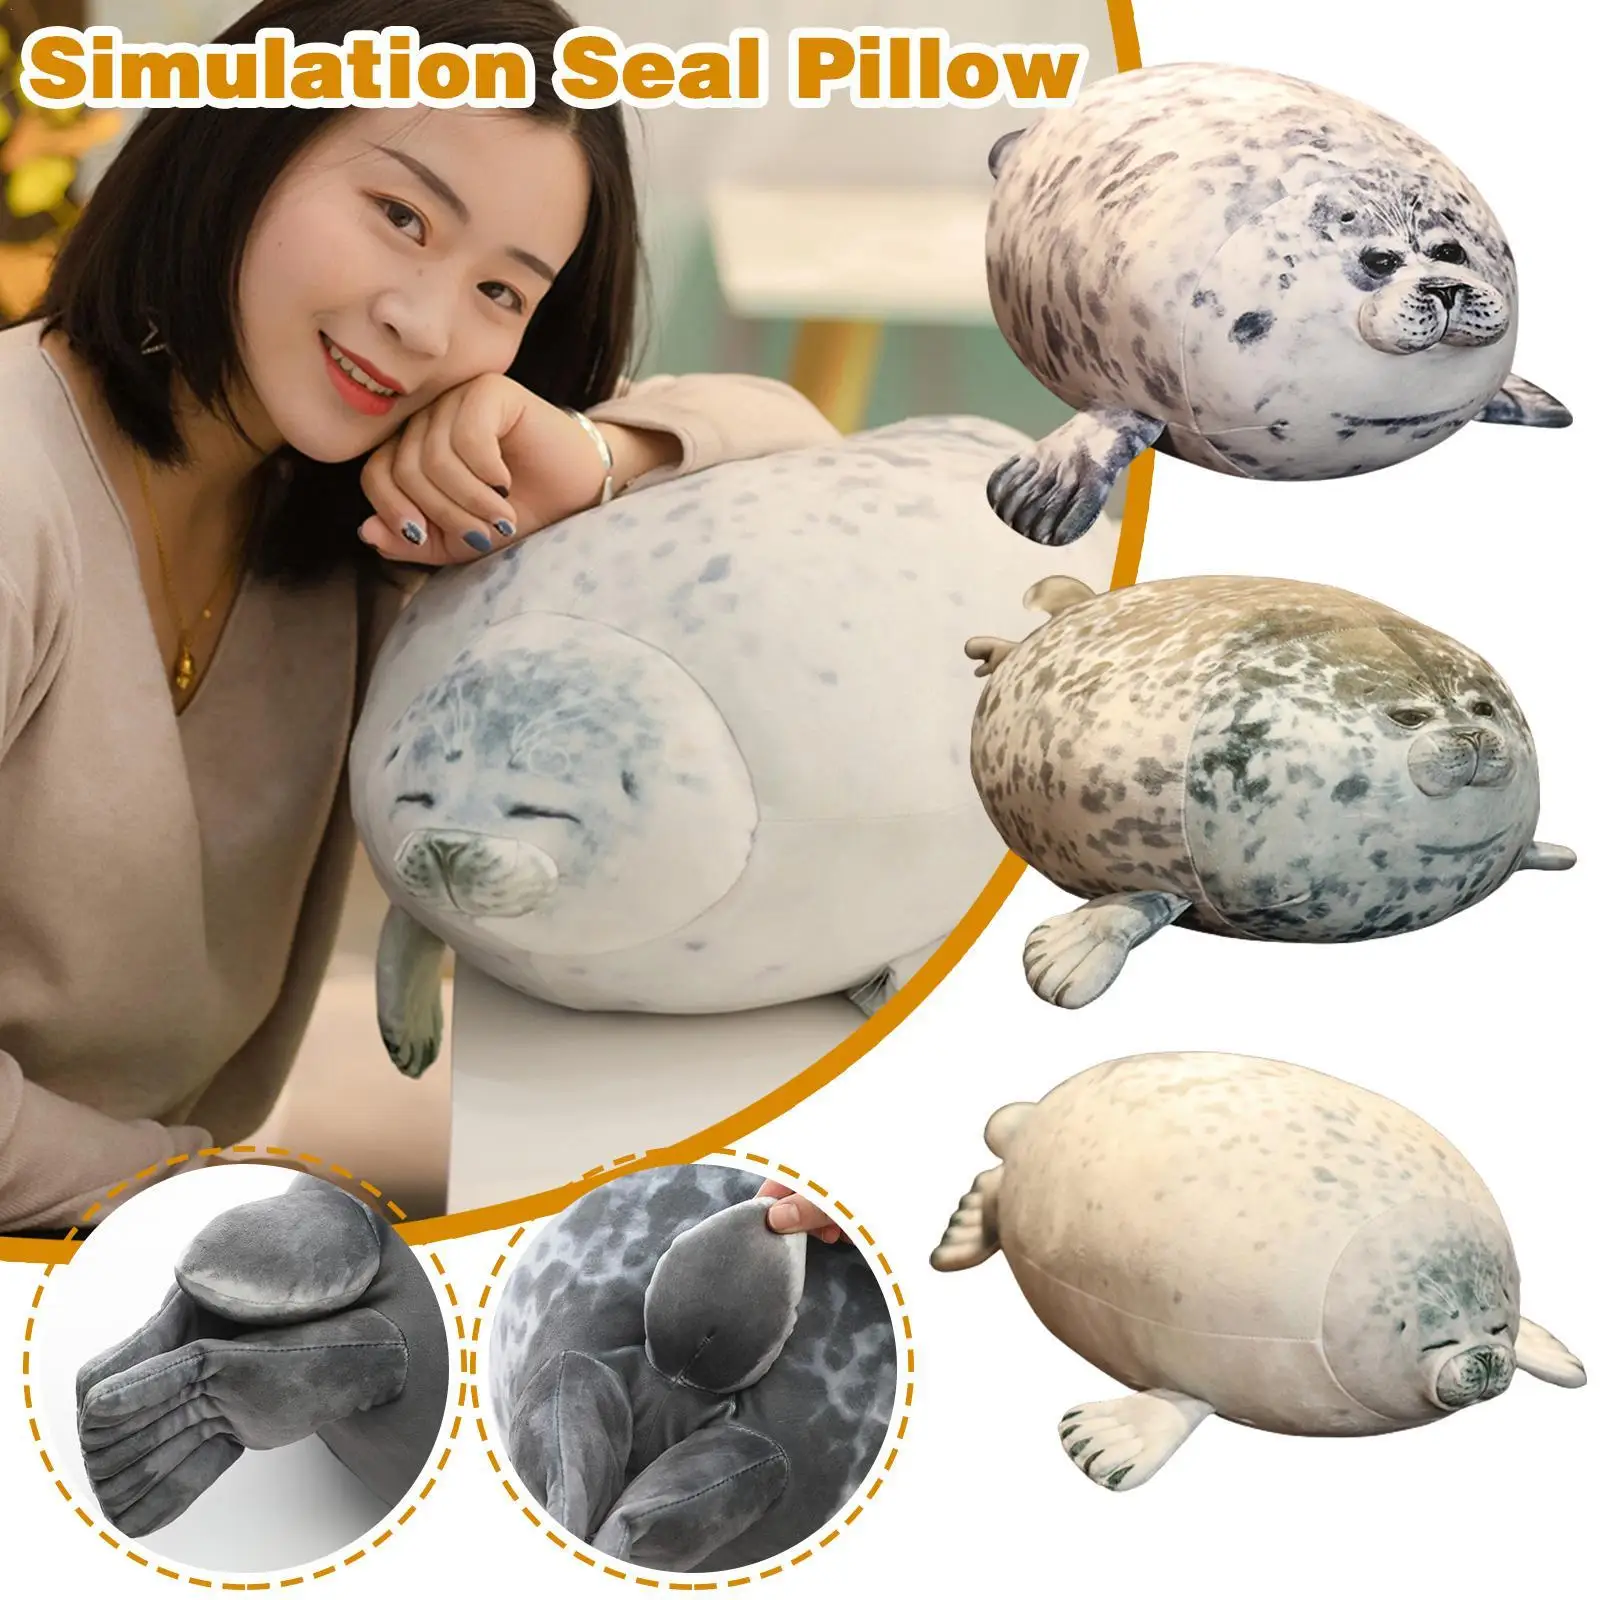 

200pcs 20CM Angry Blob Seal Pillow Chubby 3D Novelty Sea Lion Doll Plush Stuffed Toy Baby Sleeping Throw Pillow Gifts